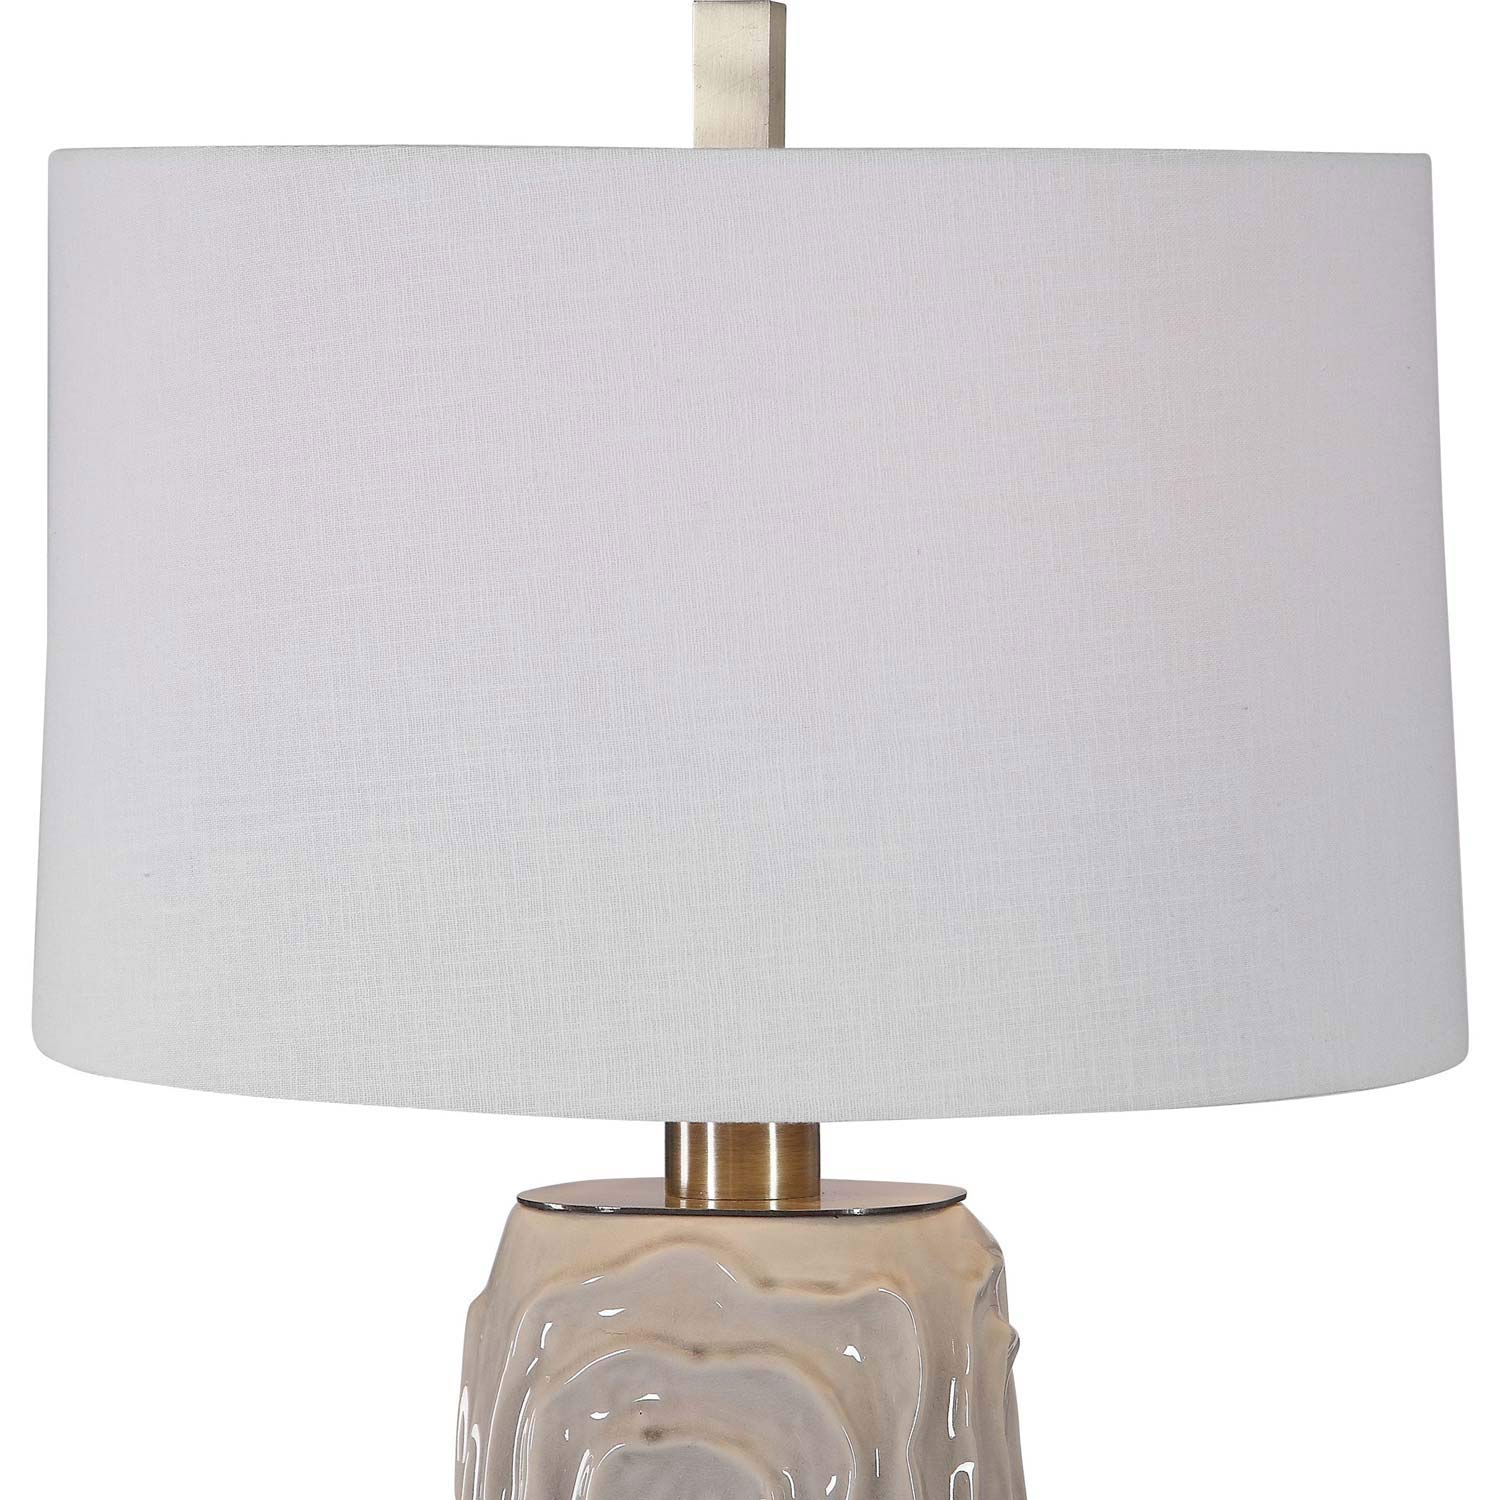 Uttermost Zade Table Lamp - Warm Gray